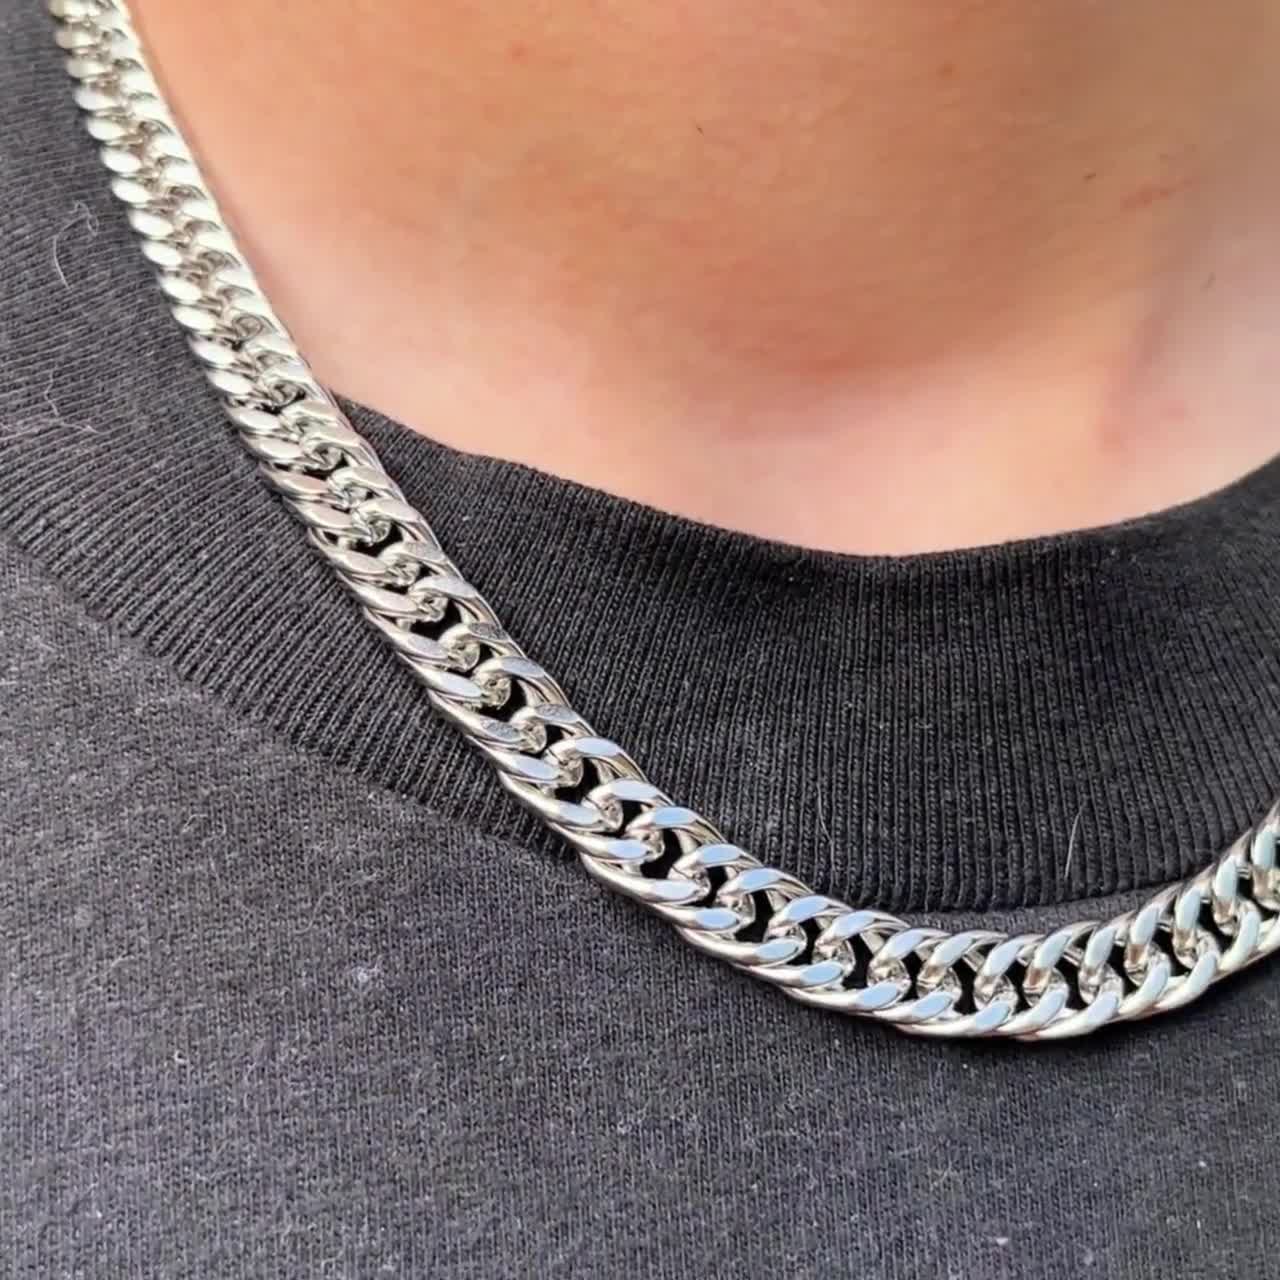 Silver Stainless Steel 3mm Rope Chain Necklace - 16 inch SS08s-16